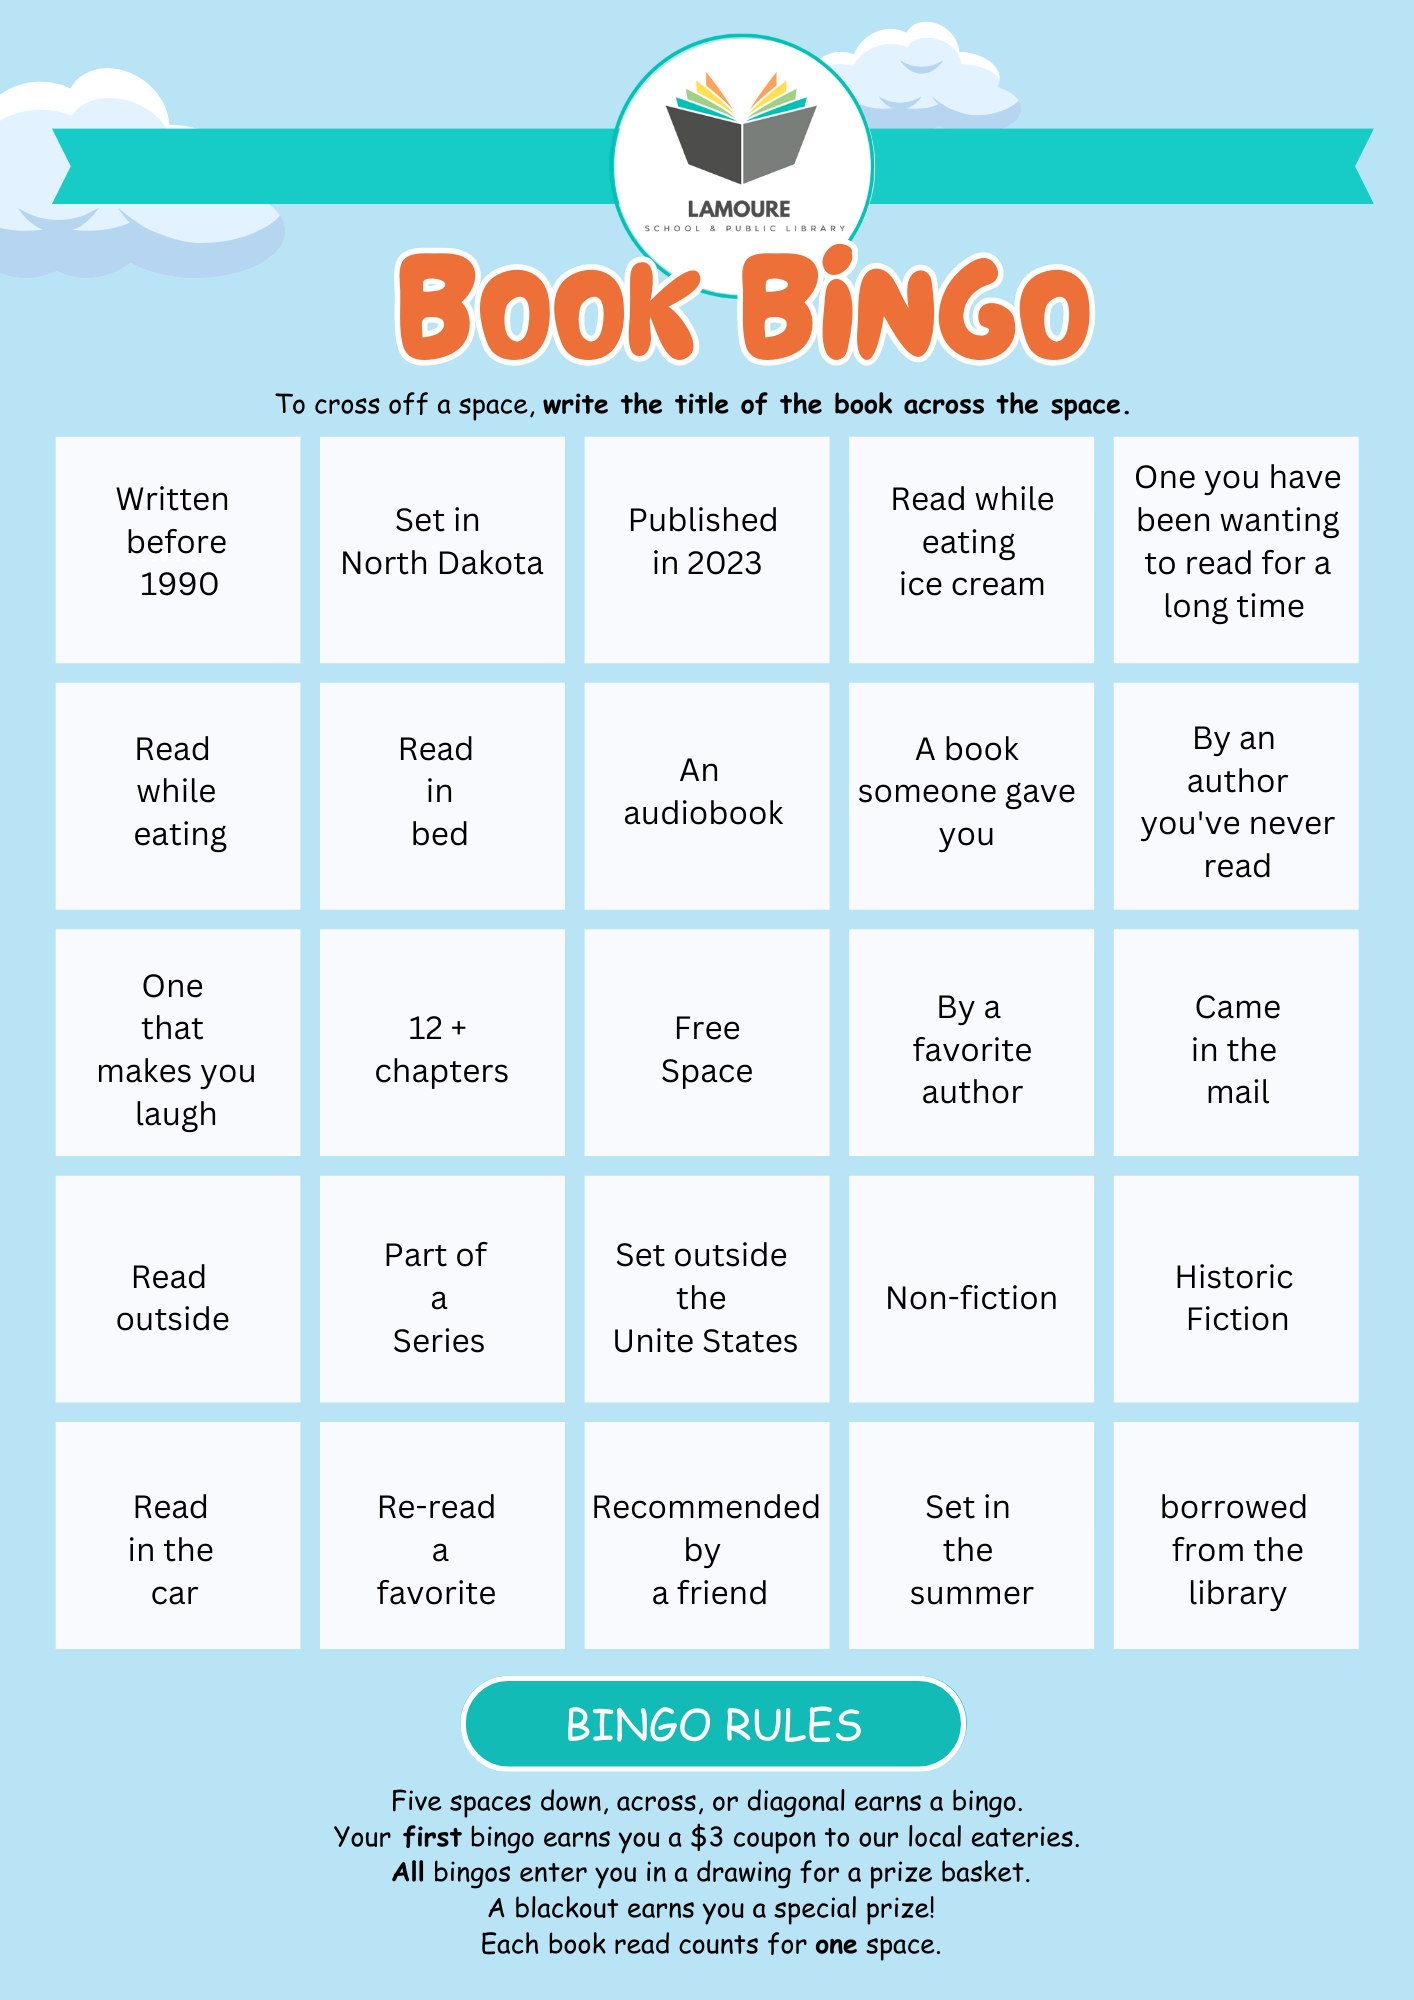 book bingo. across from right to left; written before 1990, set in ND, Published in 2023,read while eating ice cream, a book you have been wanting to read . row two across; read while eating, read in bed, an audiobook, one someone gave you, an  author you've never read. row three; one that makes you laugh, 12+ chapters, free space, by a favorite author, delivered in the mail. row four; read outside, in a series, set outside of the united states, nonfiction, historical fiction. row five; read in the car, re-read a favorite, recommended by a friend, set in the summer, borrowed from the library.